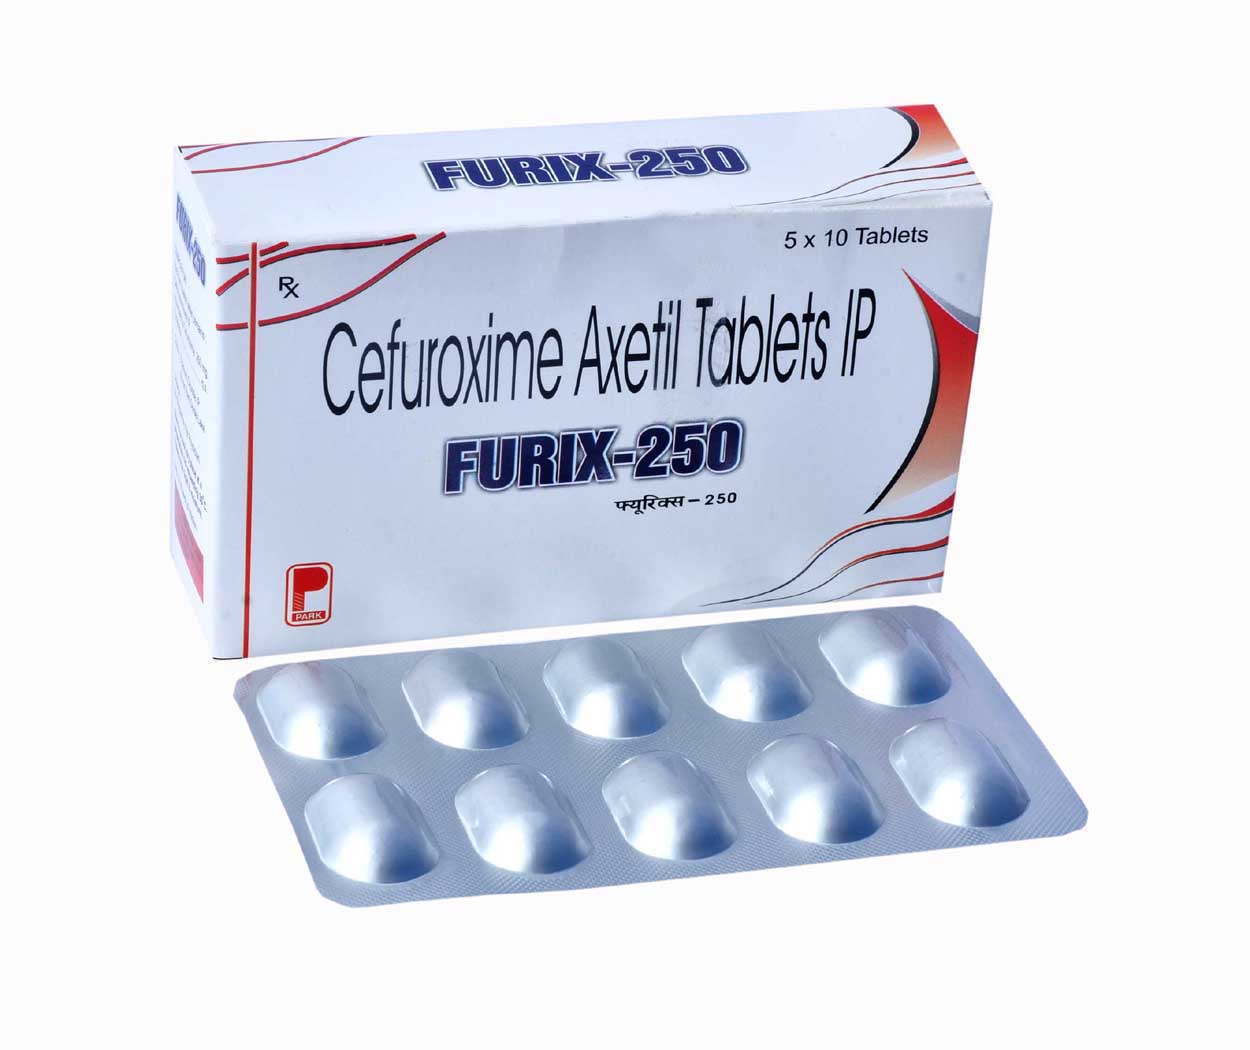 Product Name: Furix 250, Compositions of Furix 250 are Cefuroxime Axetil Tablets IP - Park Pharmaceuticals